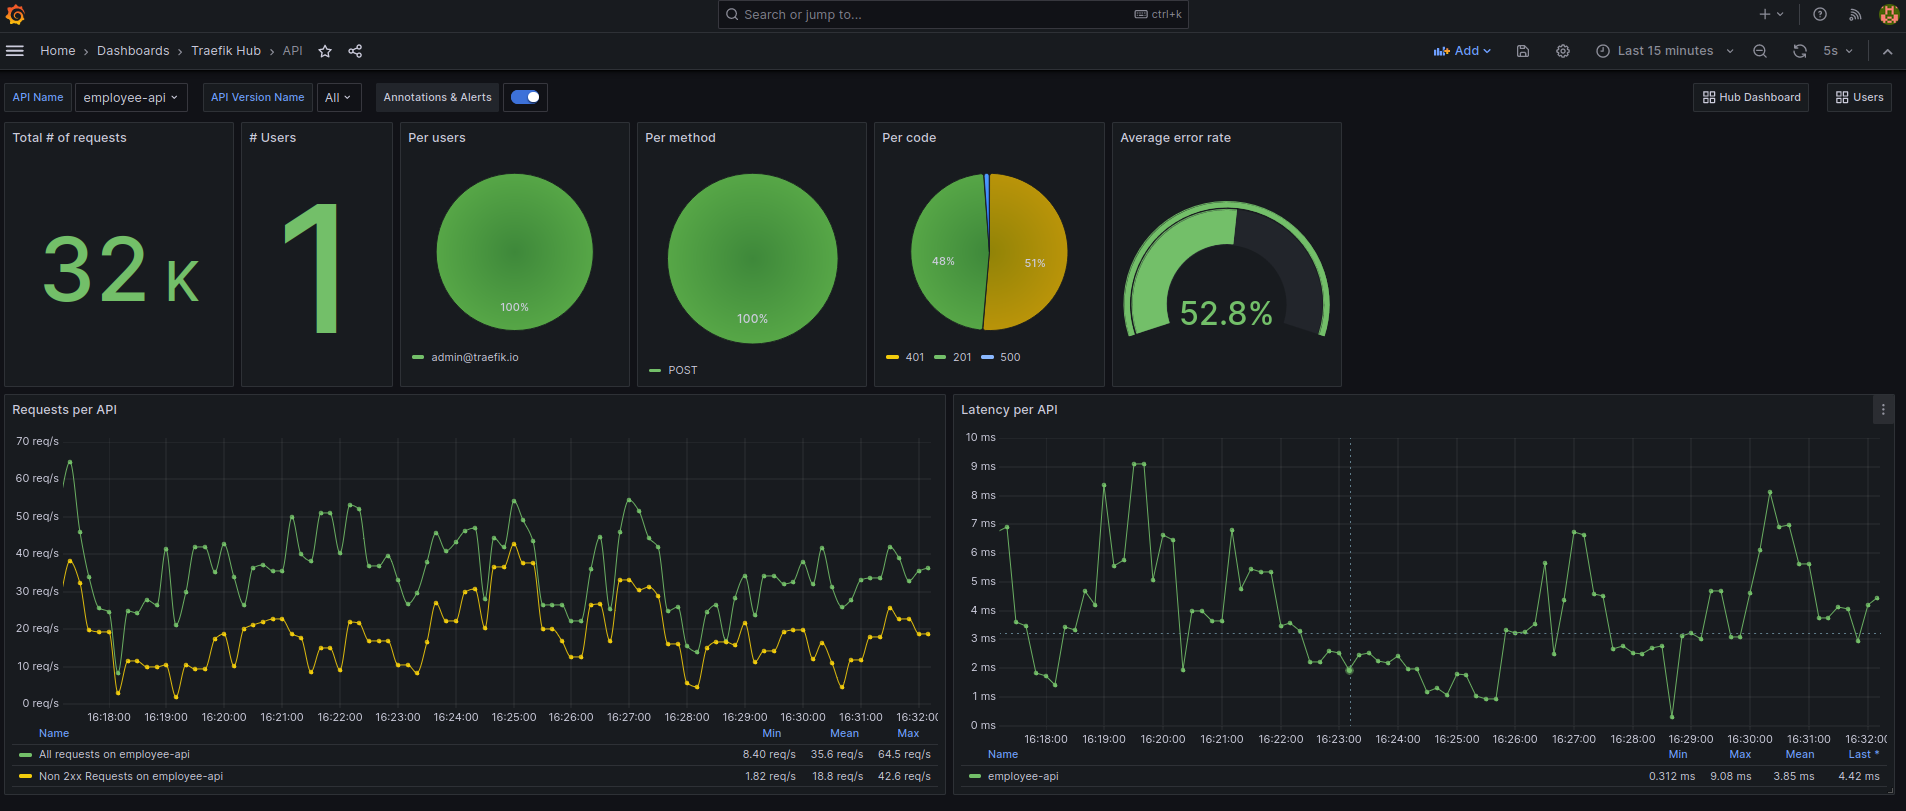 OpenTelemetry Grafana dashboard with traffic patterns, latency, and error rates.